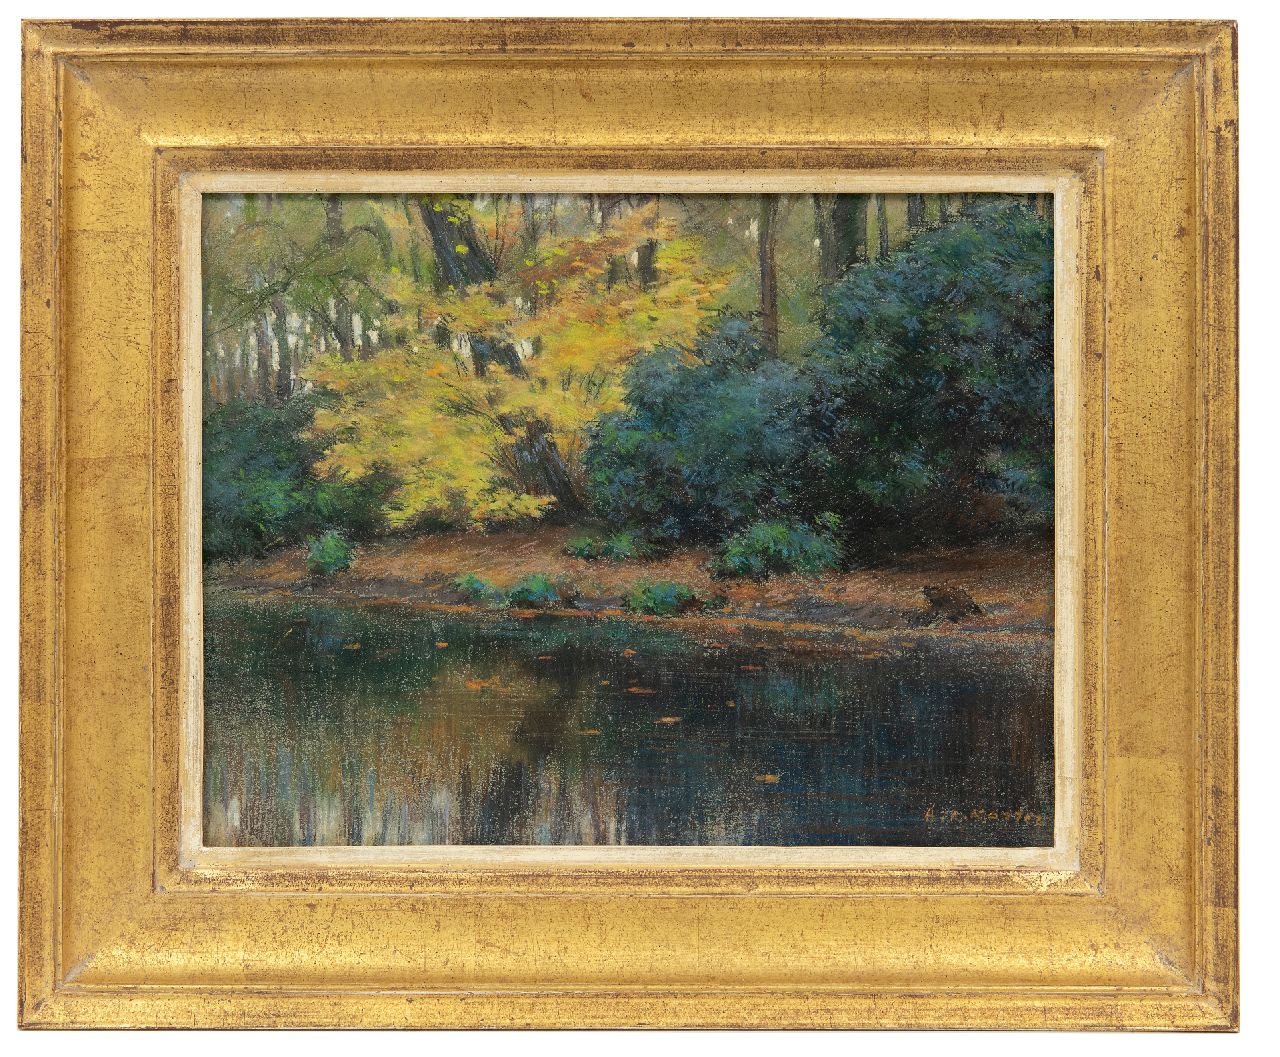 Koster A.L.  | Anton Louis 'Anton L.' Koster | Watercolours and drawings offered for sale | Pond in park Groenendaal, Heemstede, pastel on paper 23.1 x 29.8 cm, signed l.r.